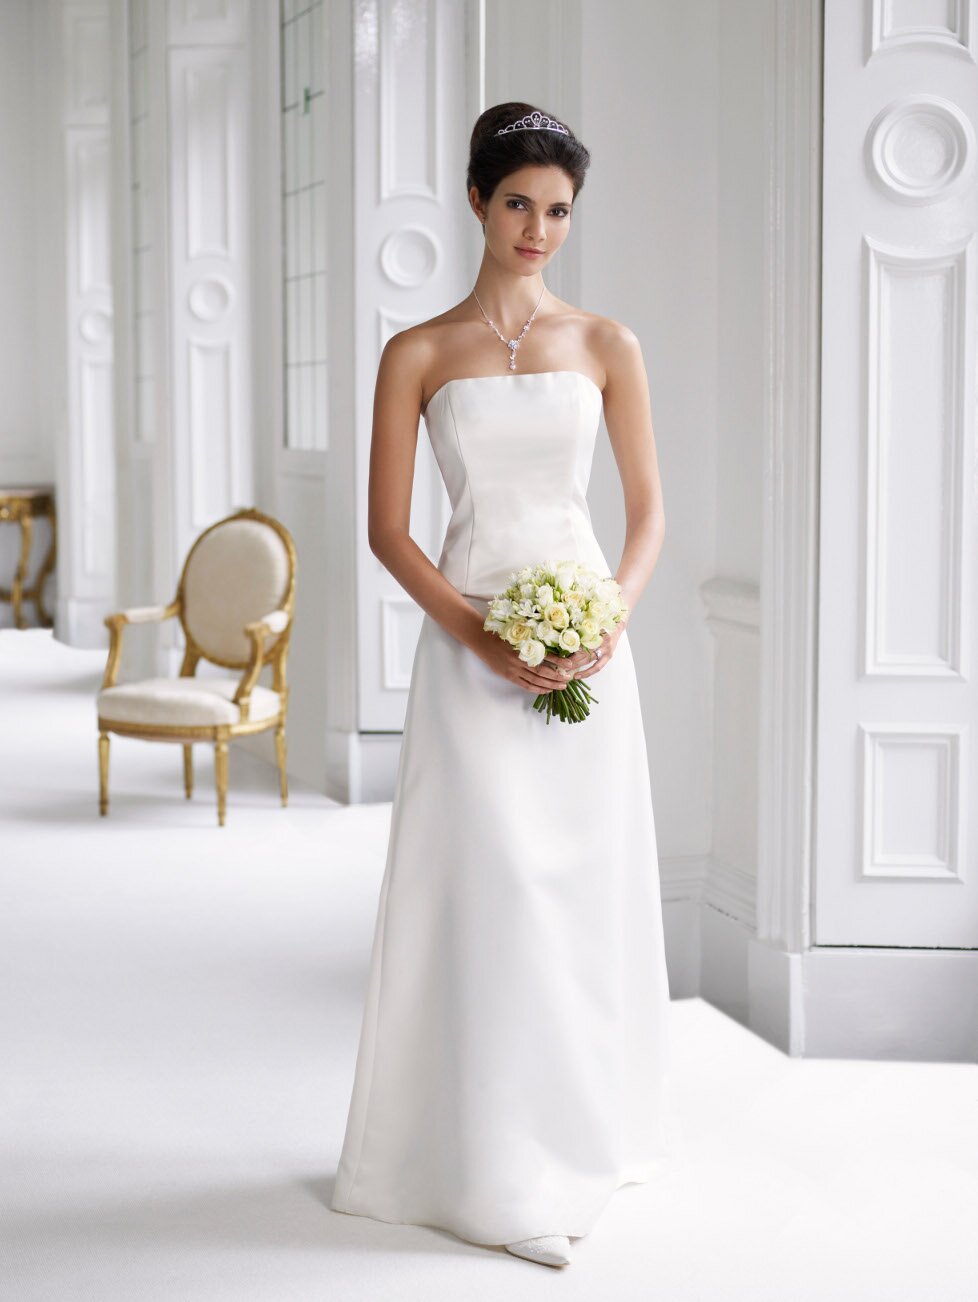 Wedding dresses with lace top Photo - 9